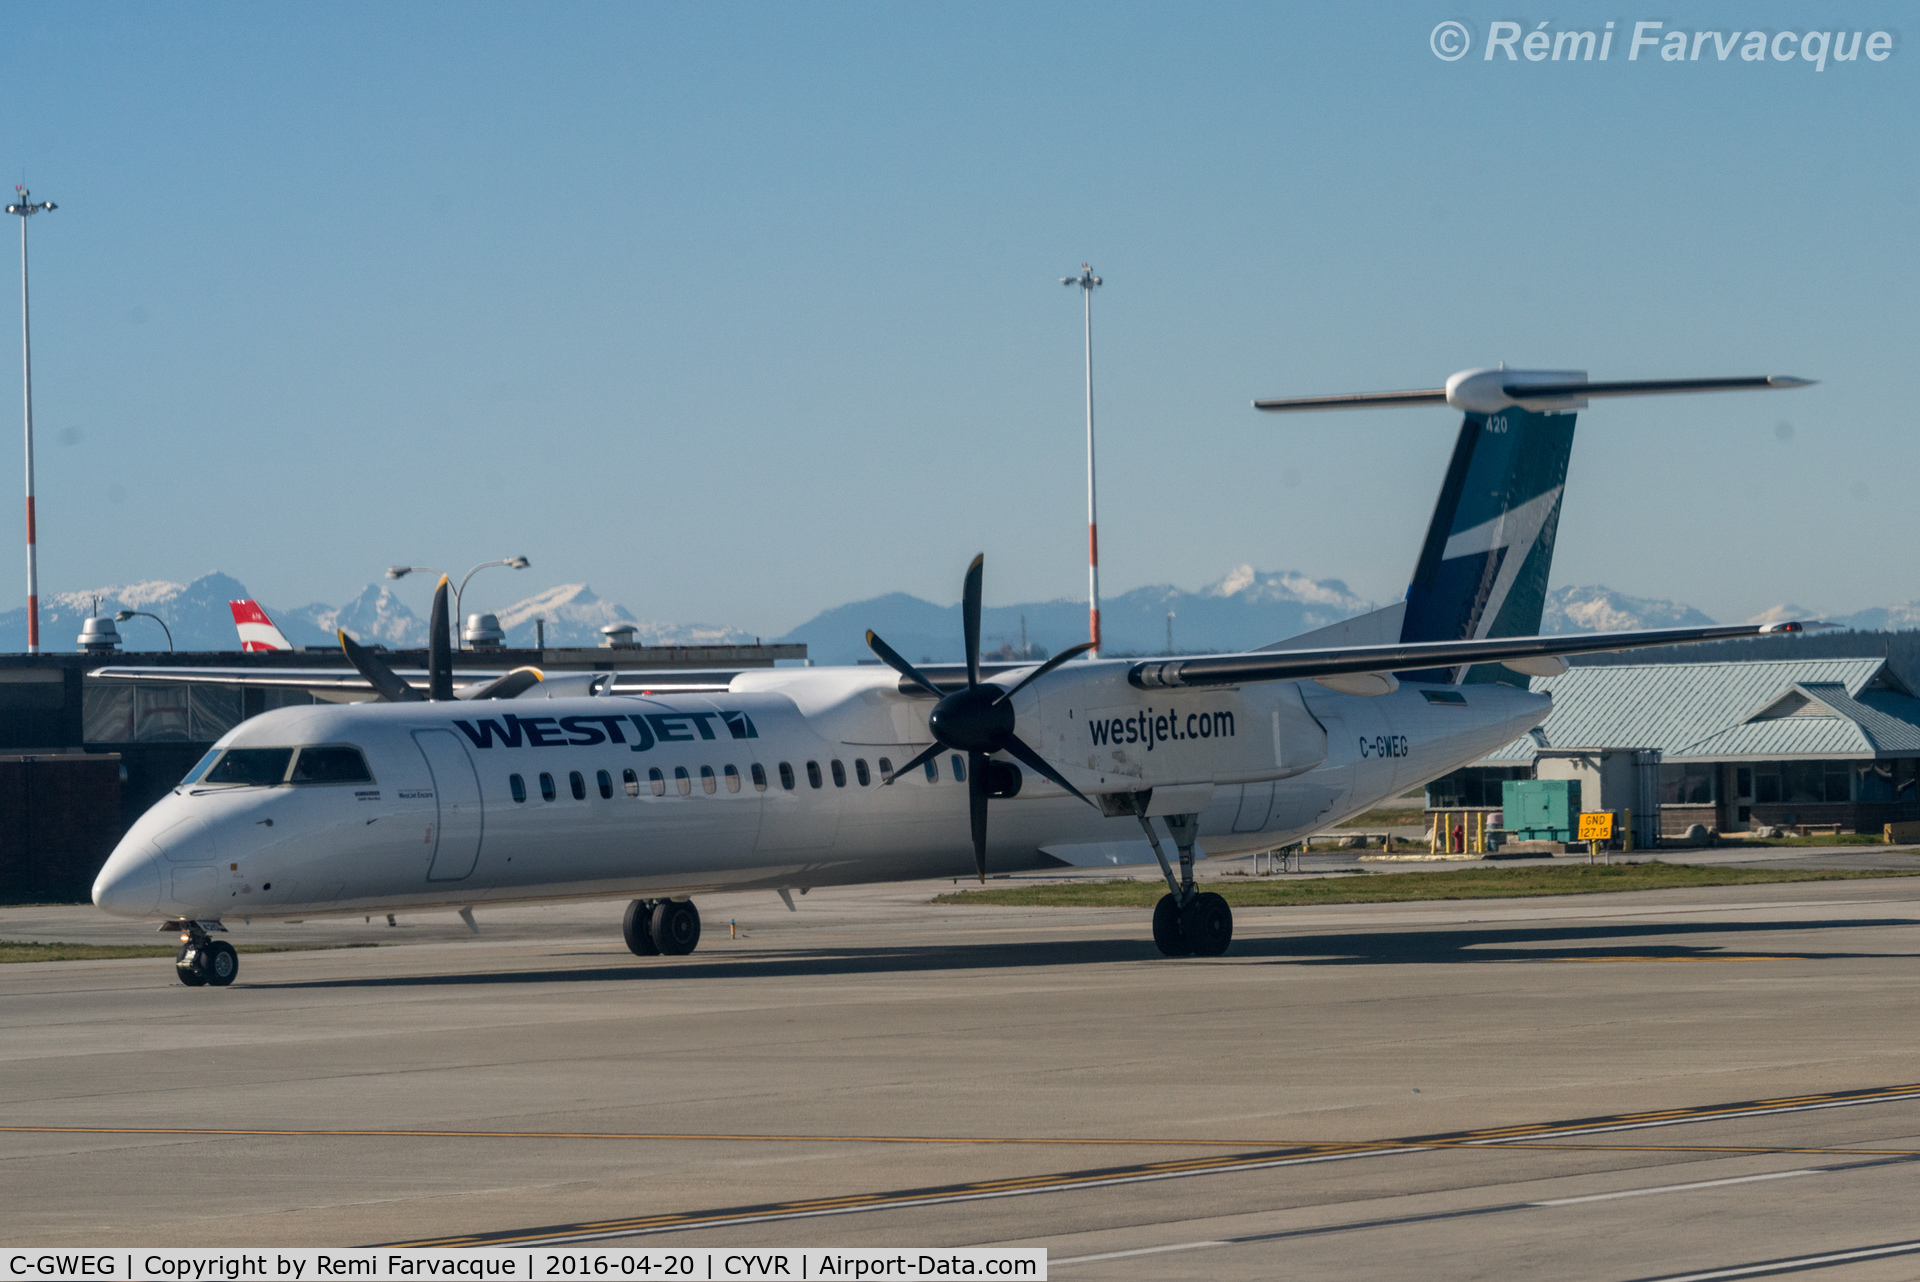 C-GWEG, 2015 Bombardier DHC-8-402Q Dash 8 Dash 8 C/N 4488, Taxiing to domestic after landing on north runway.